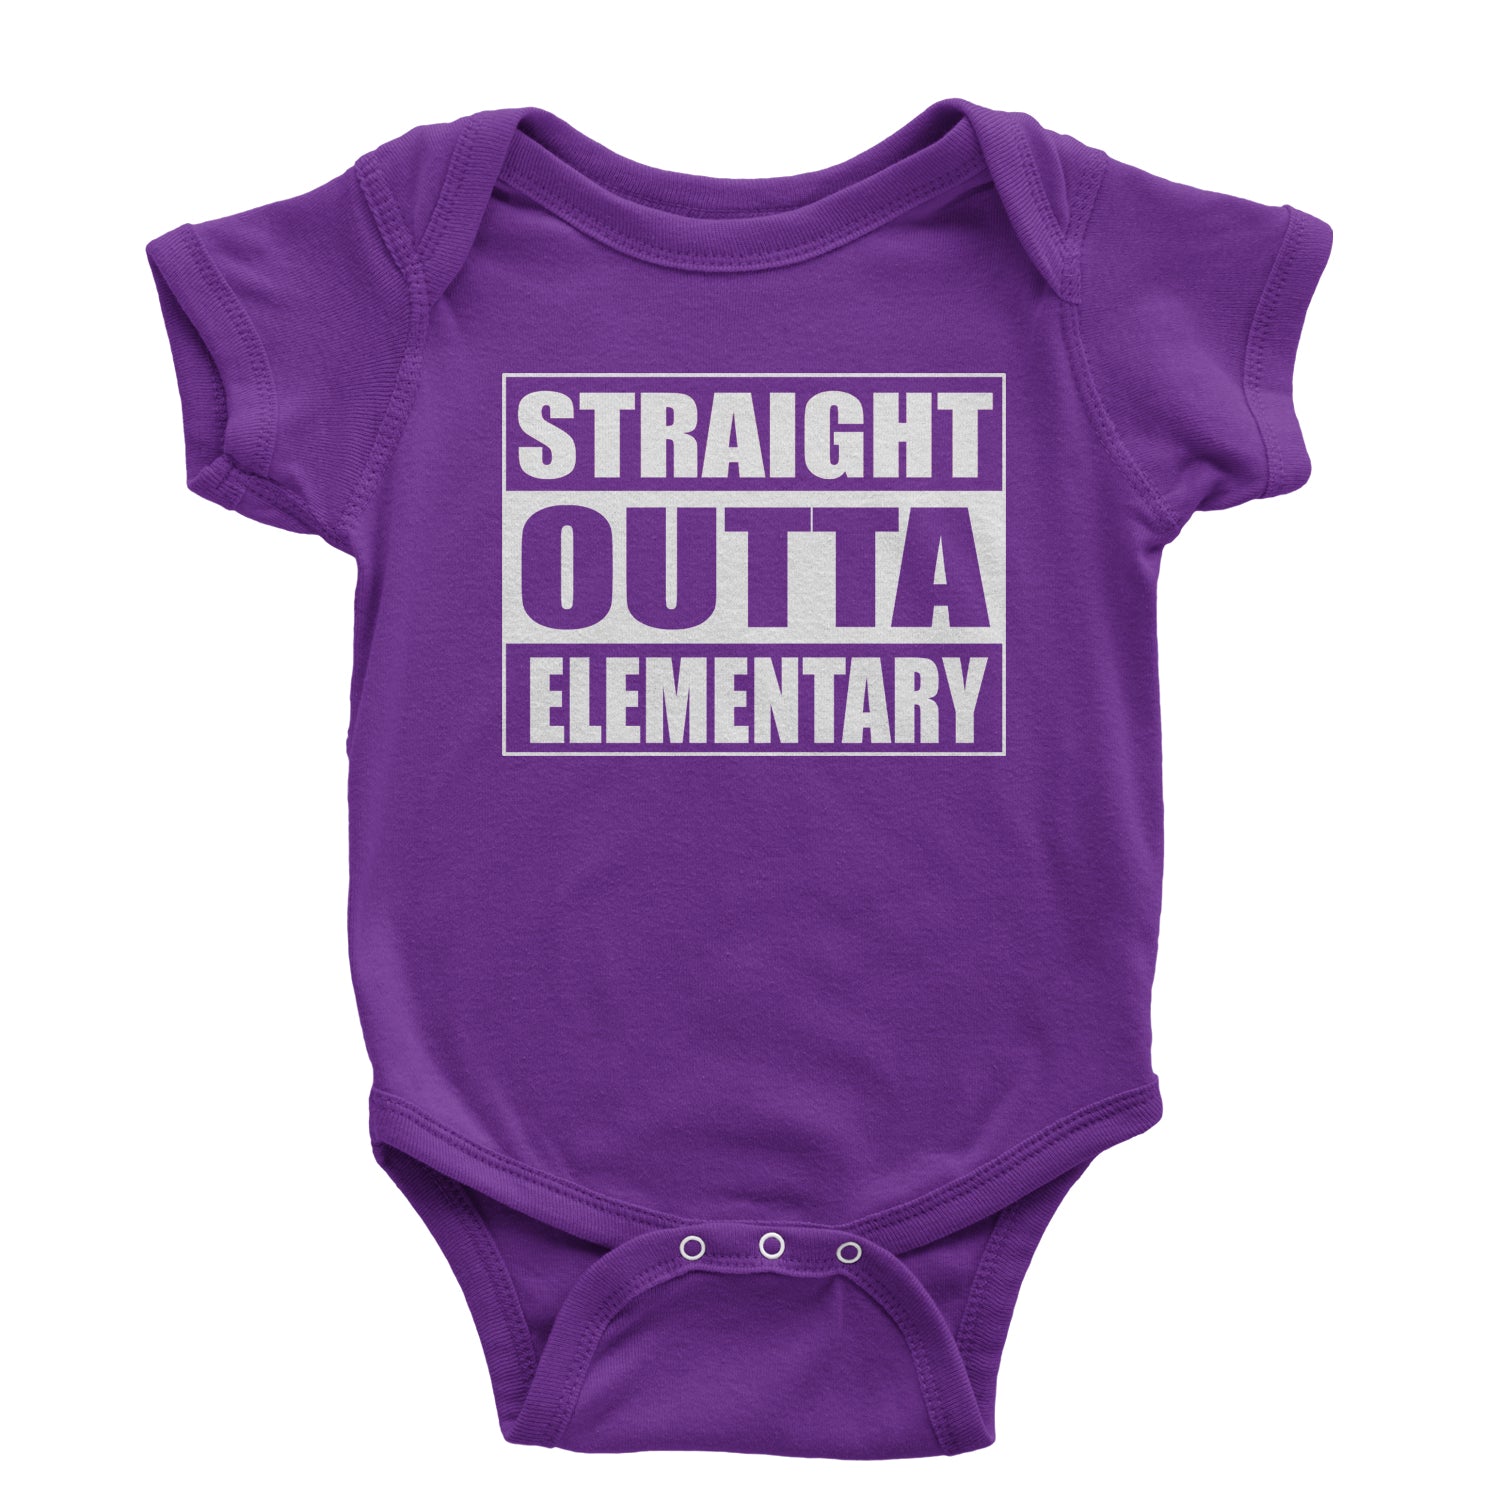 Straight Outta Elementary Infant One-Piece Romper Bodysuit 2020, 2021, 2022, class, of, quarantine, queen by Expression Tees